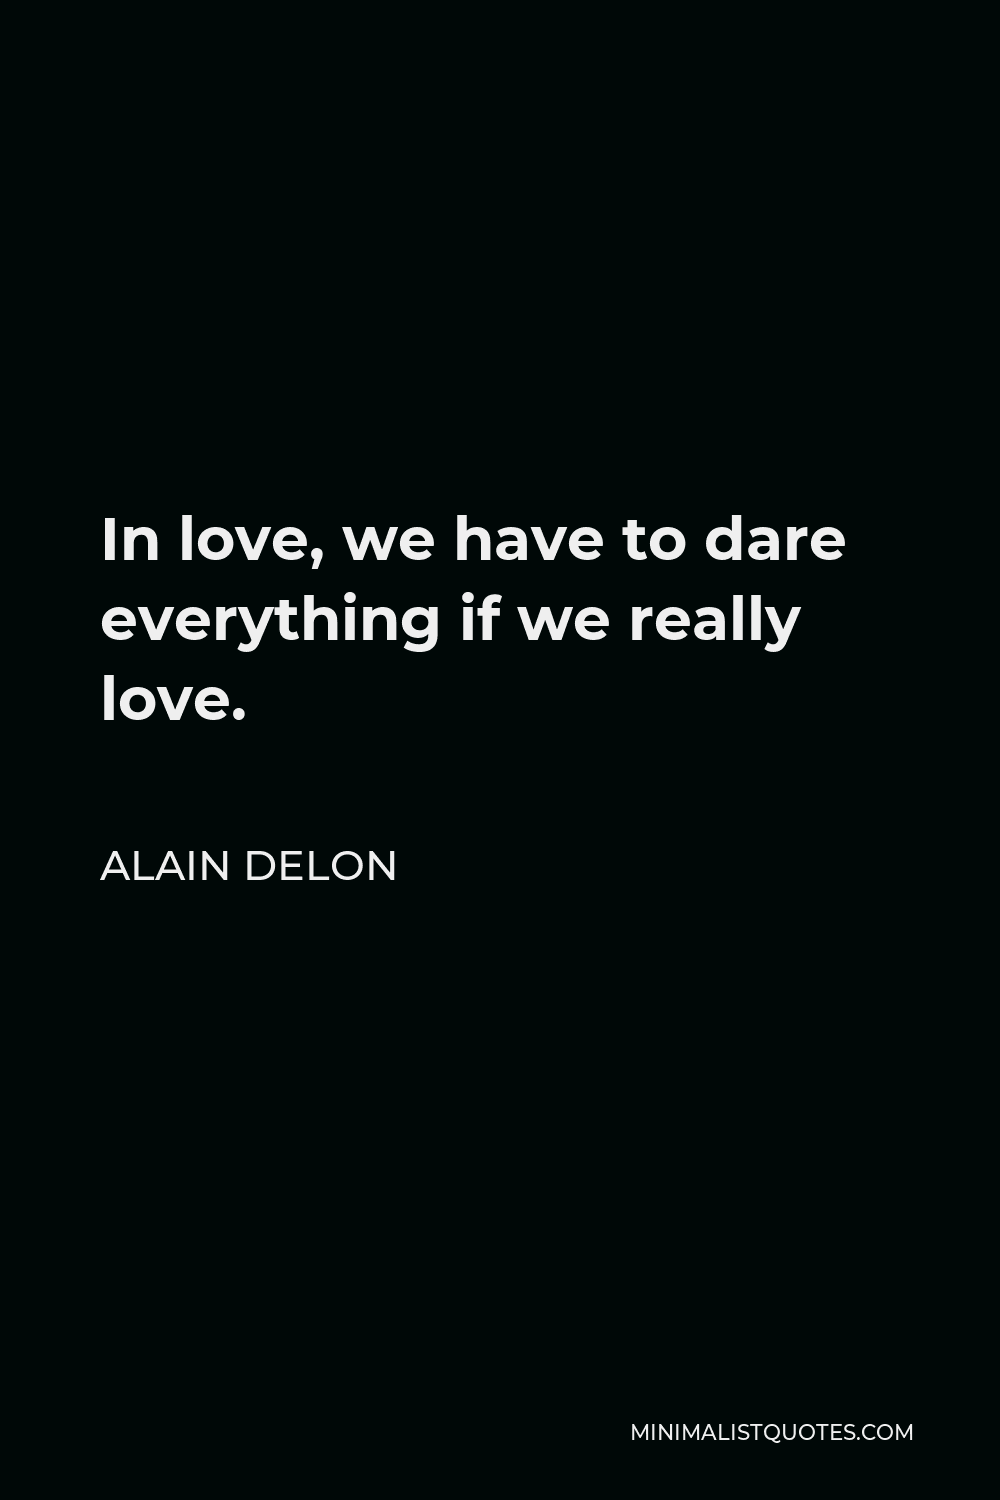 Alain Delon Quote: In love, we have to dare everything if we really love.